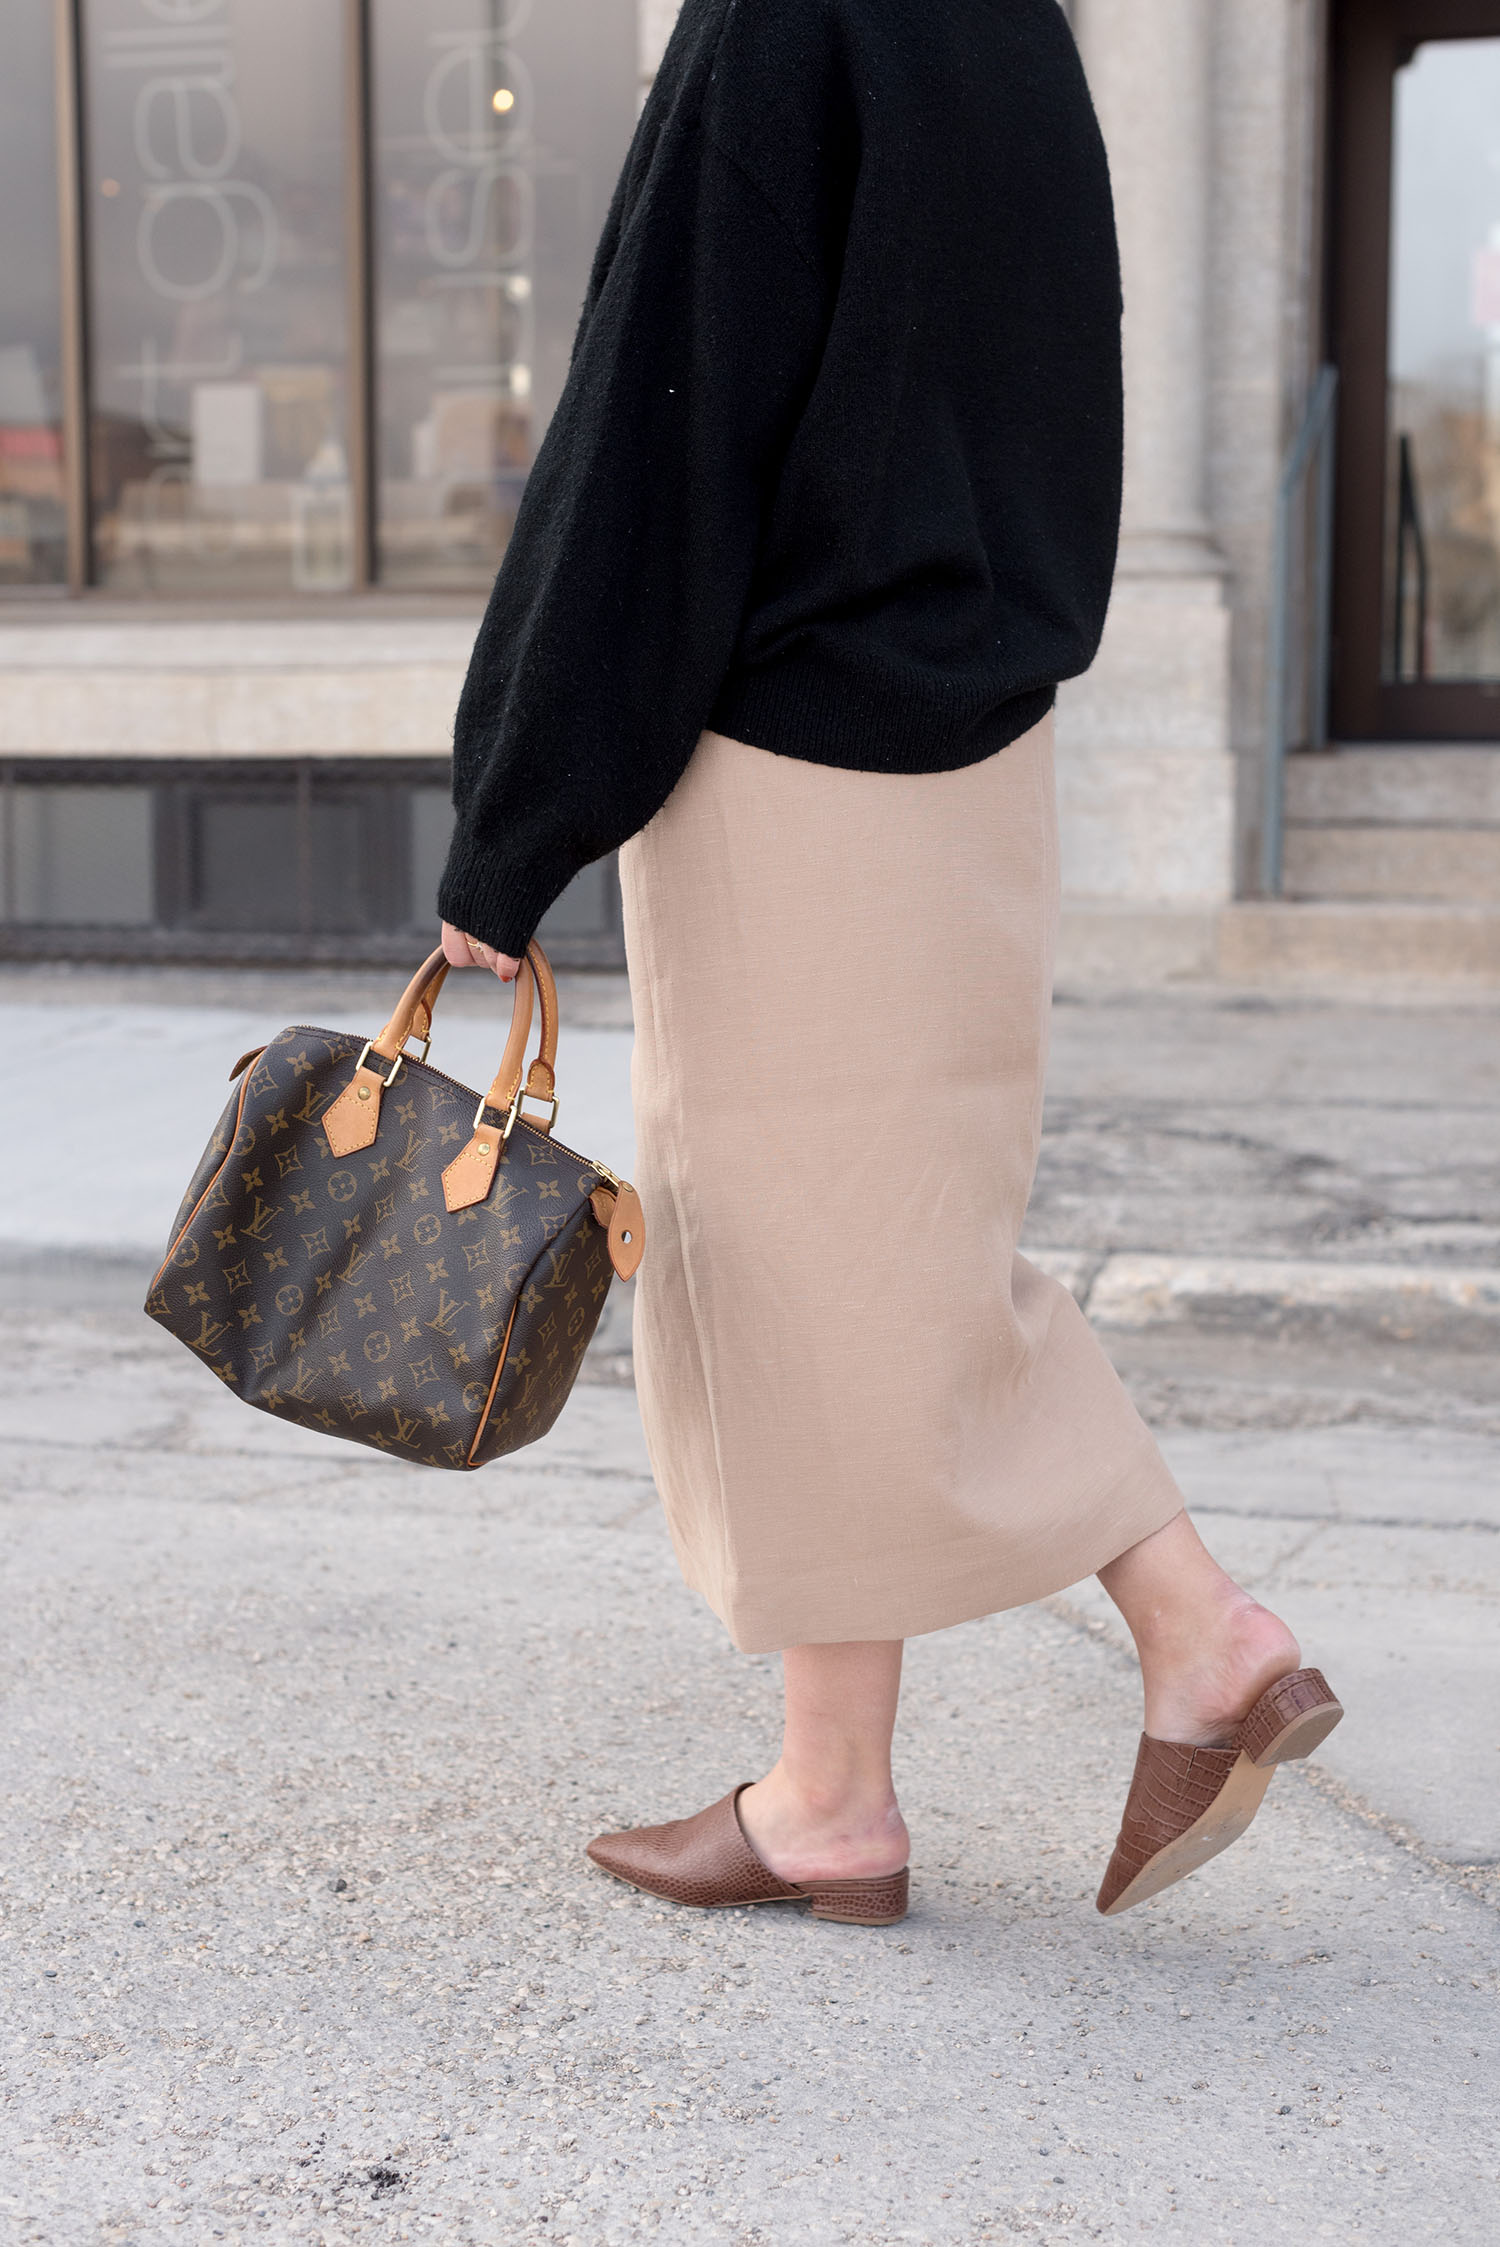 Outfit details on top Canadian fashion blogger Cee Fardoe of Coco & Vera, including Oak + Fort mules and an & Other Stories beige skirt